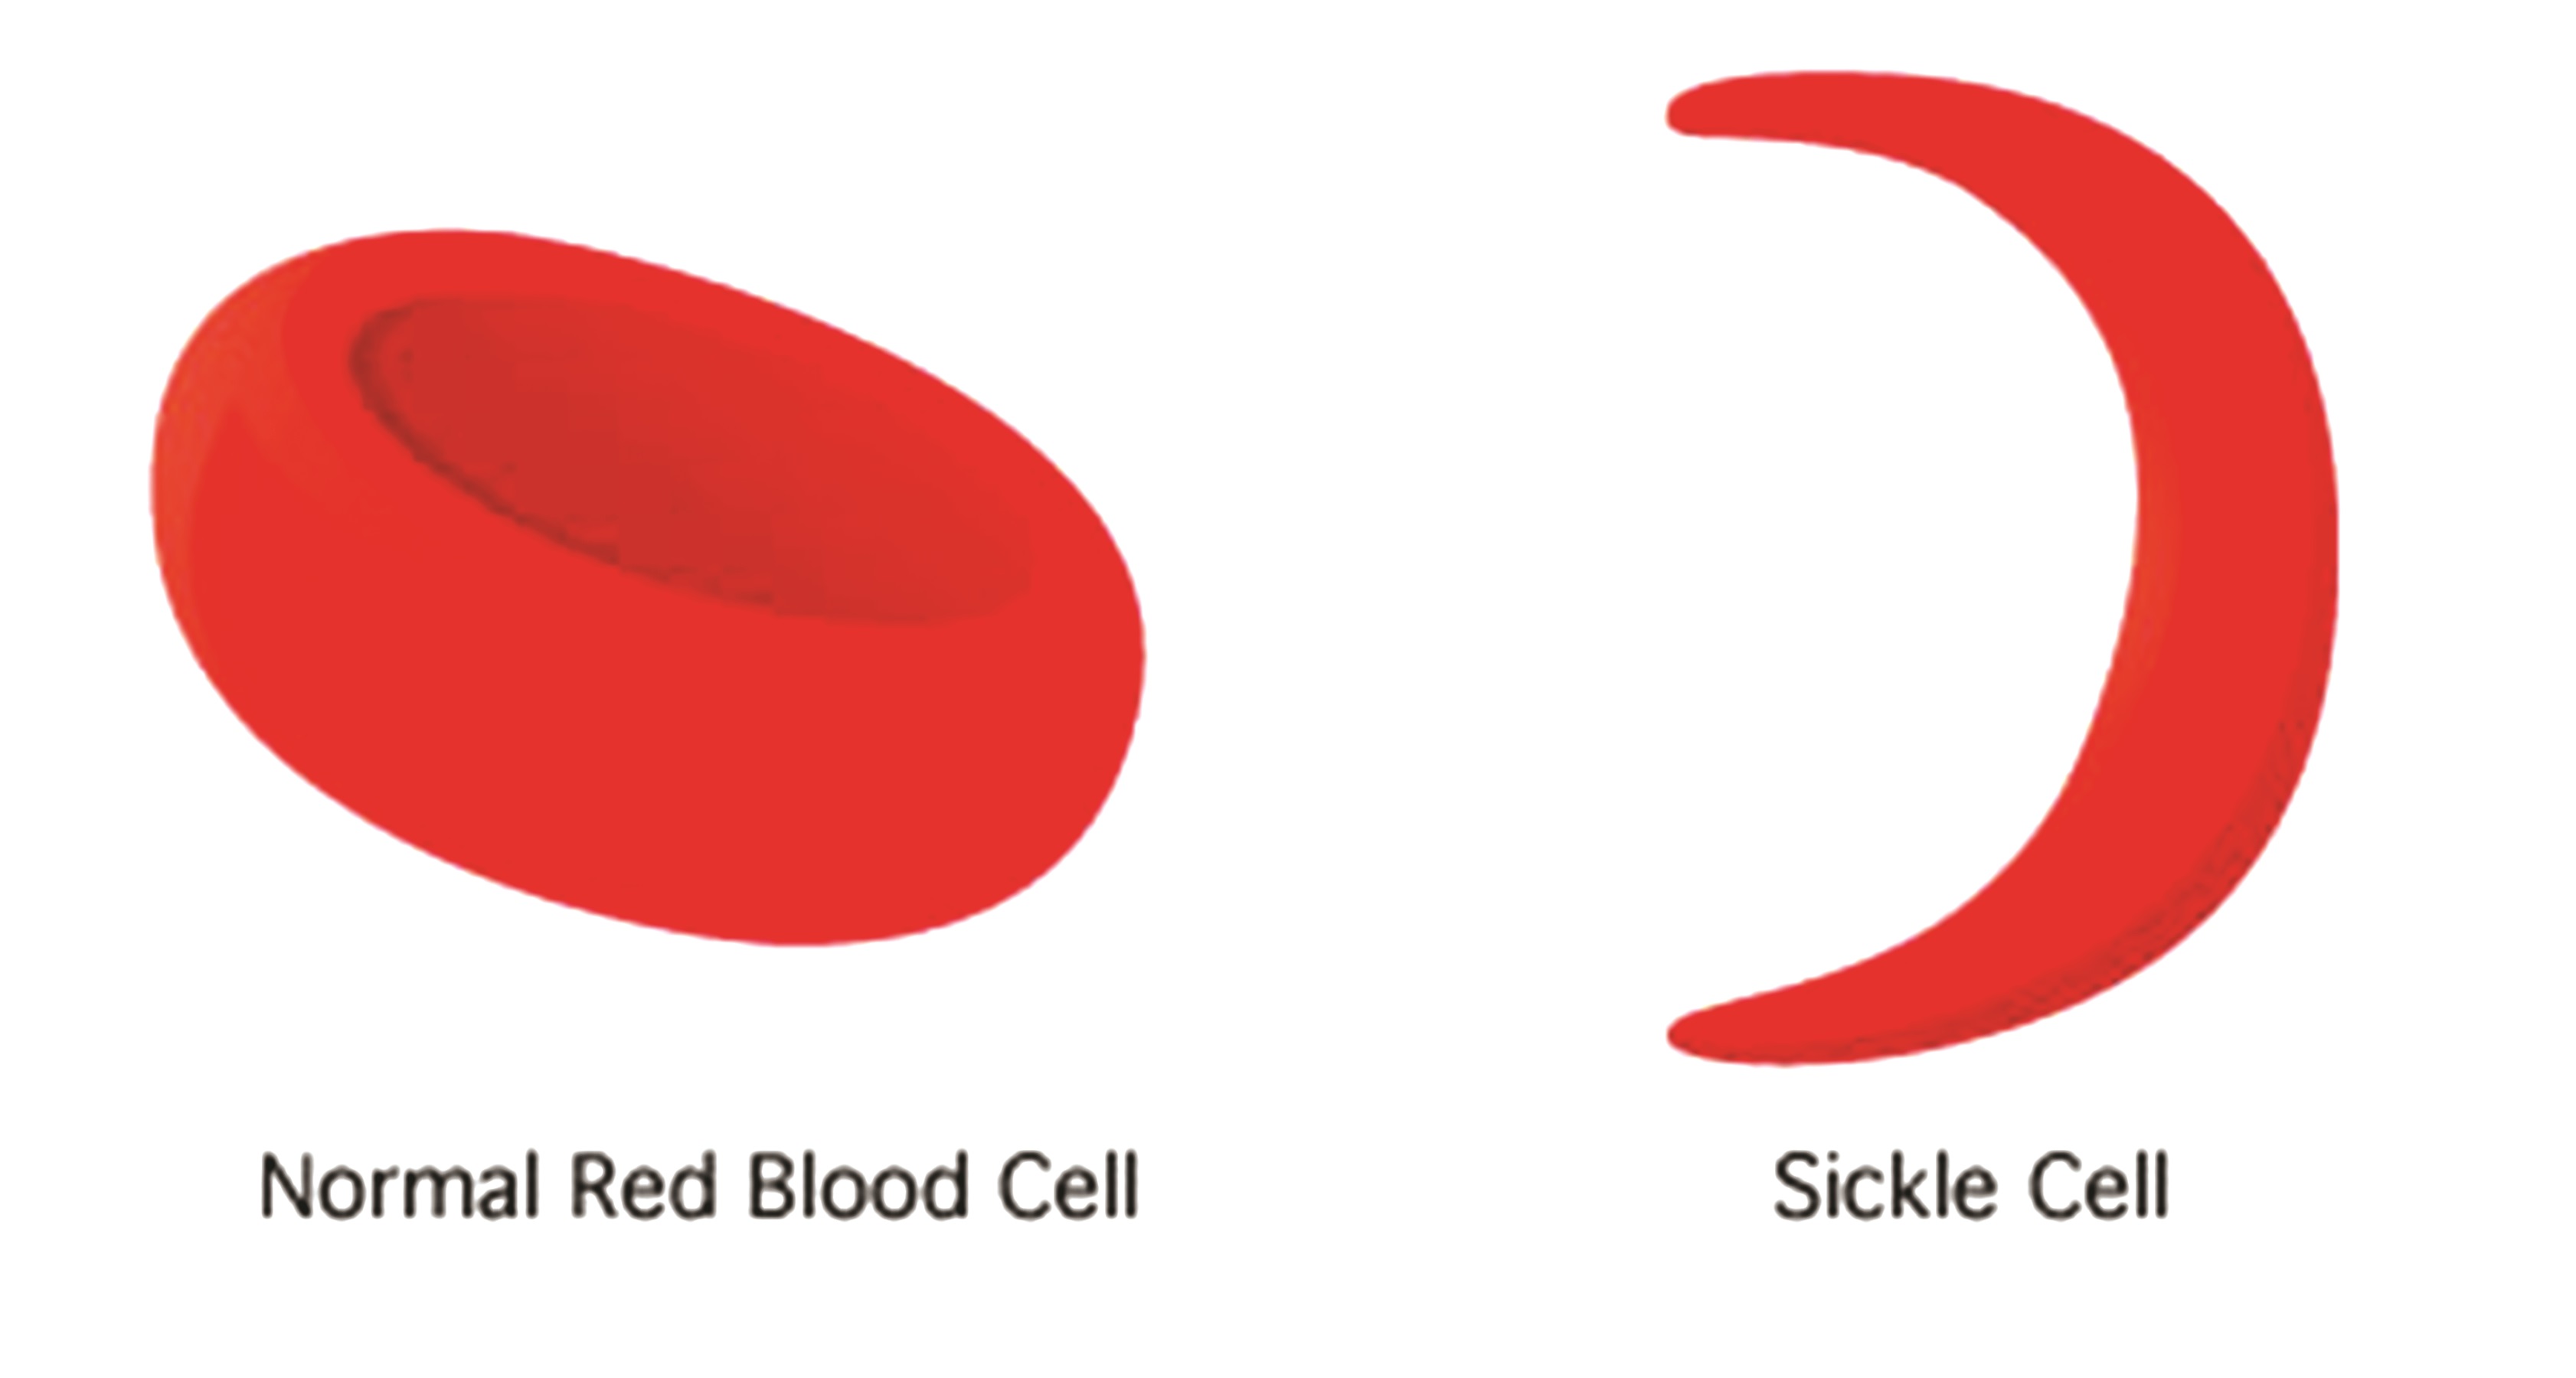 Sickle cell disease - Myths and facts